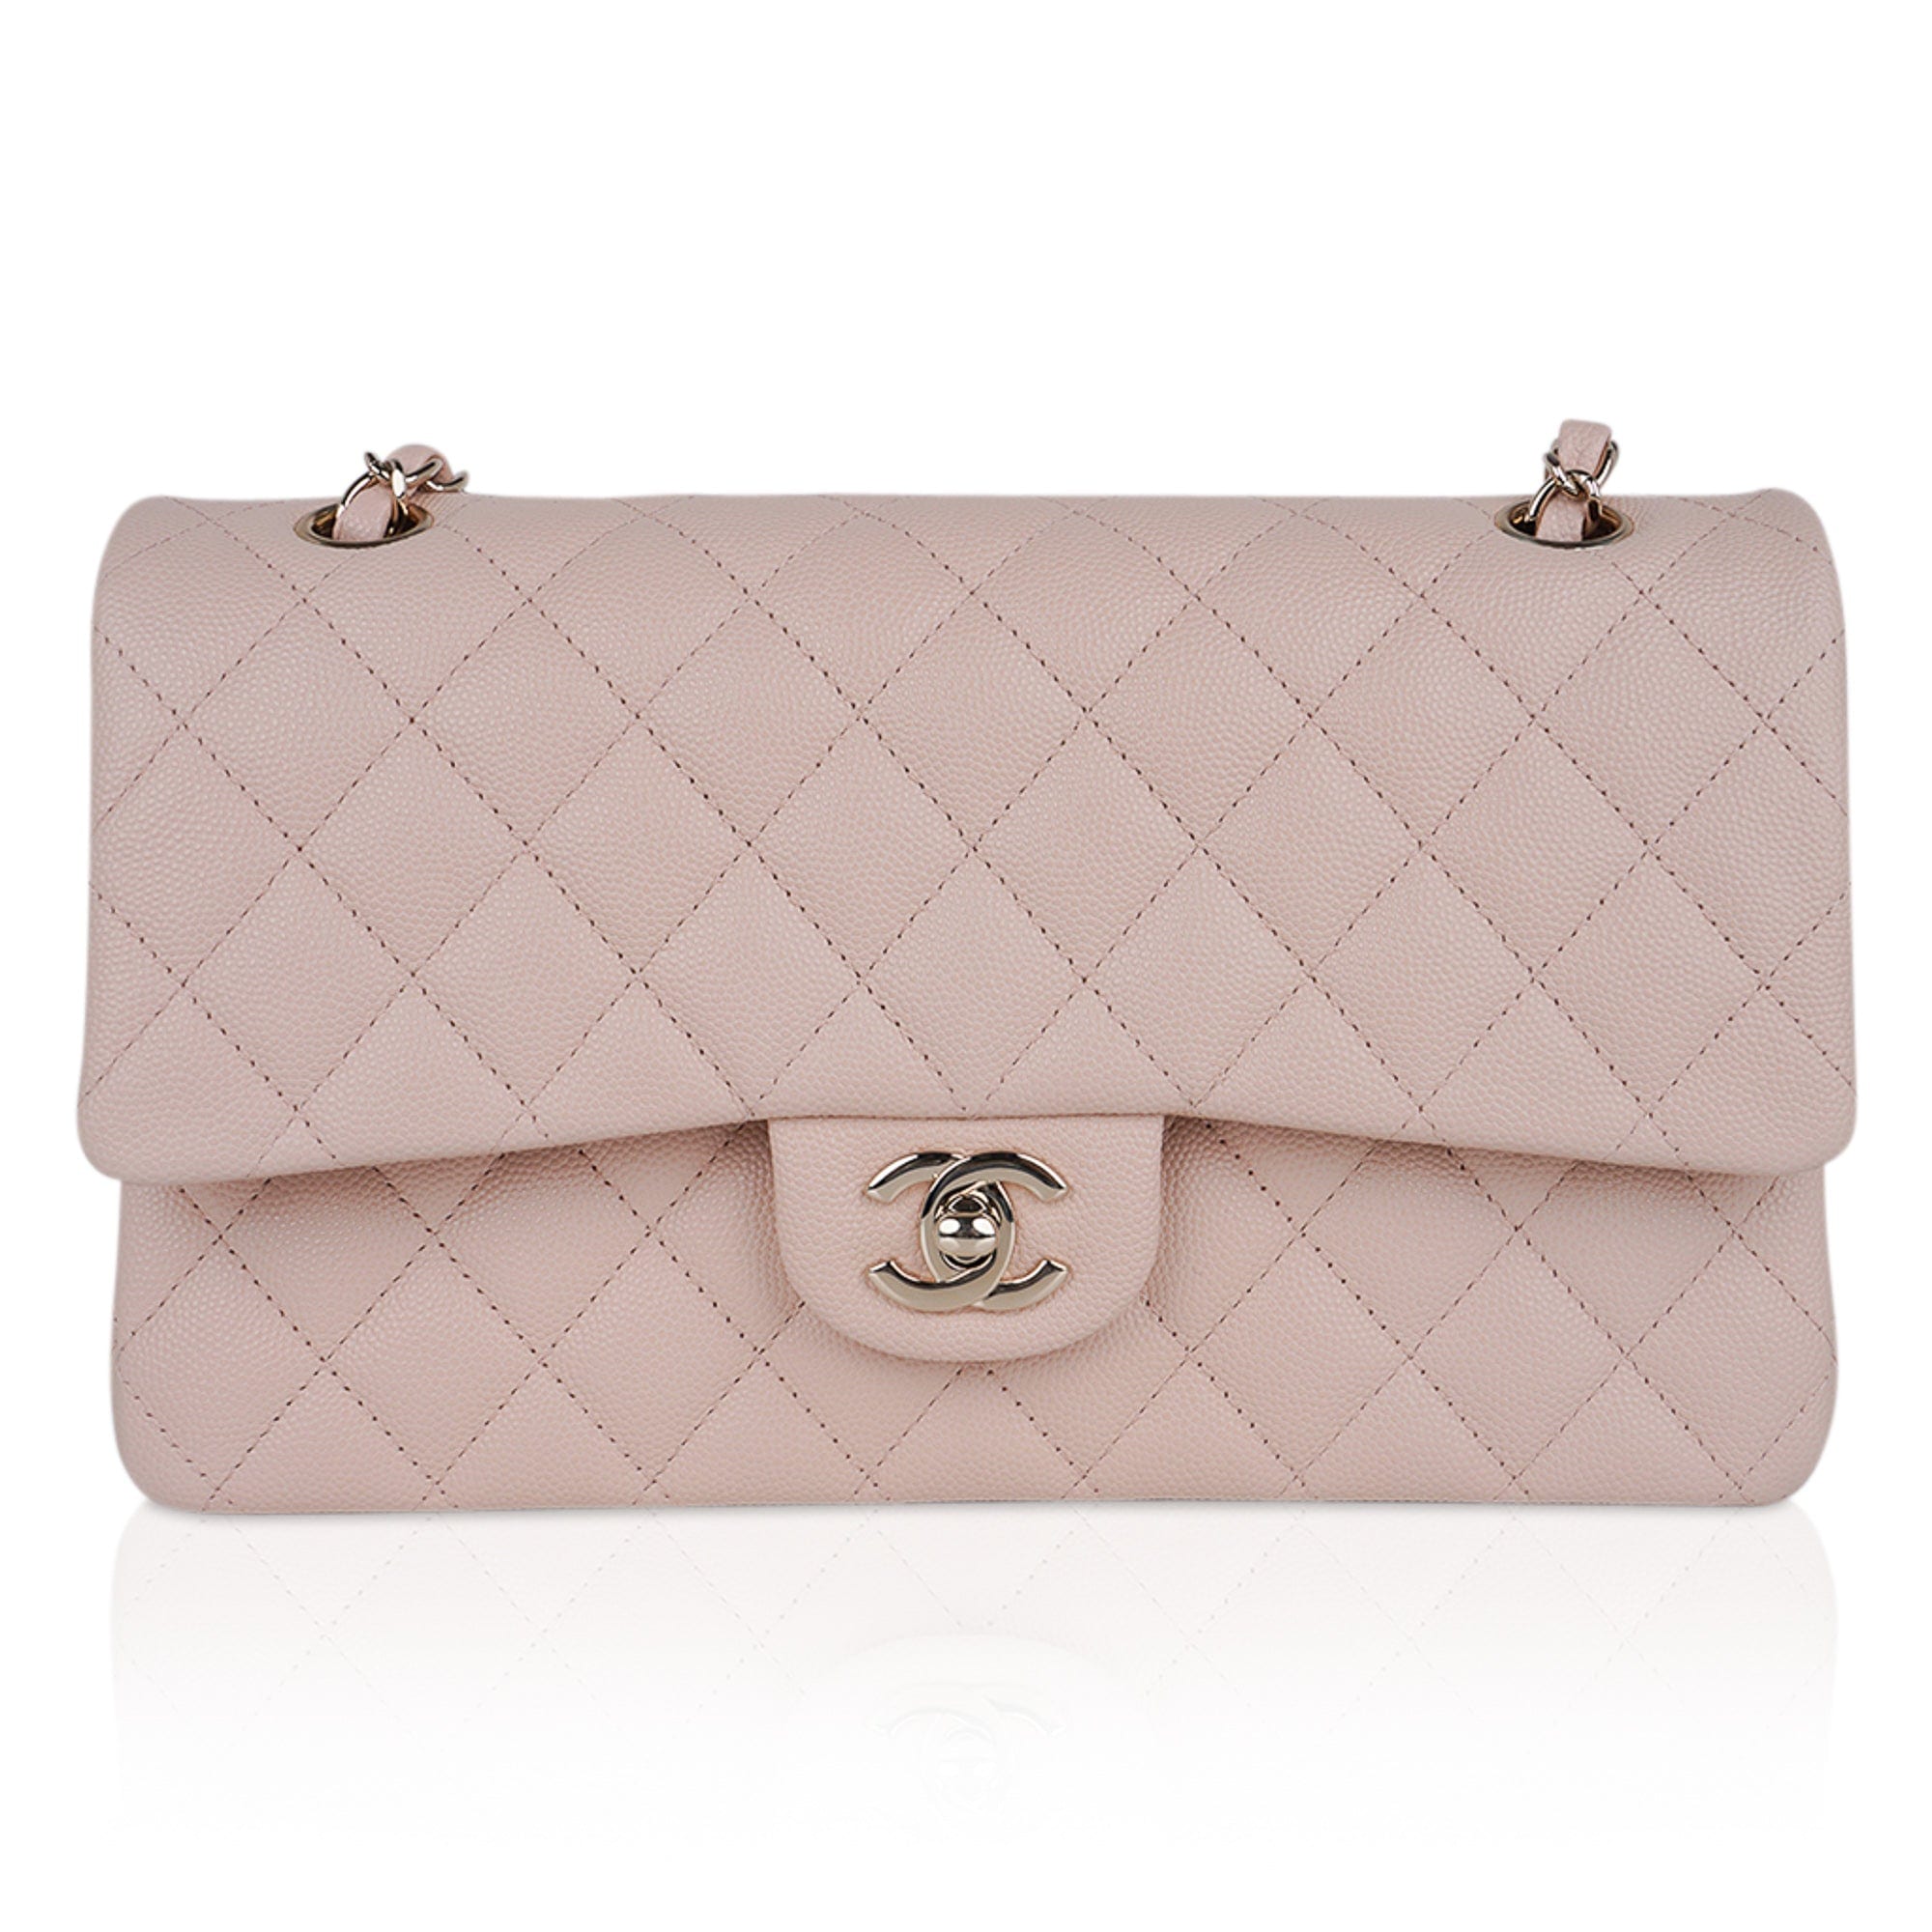 Chanel Light Beige Quilted Caviar Classic Medium Double Flap Bag